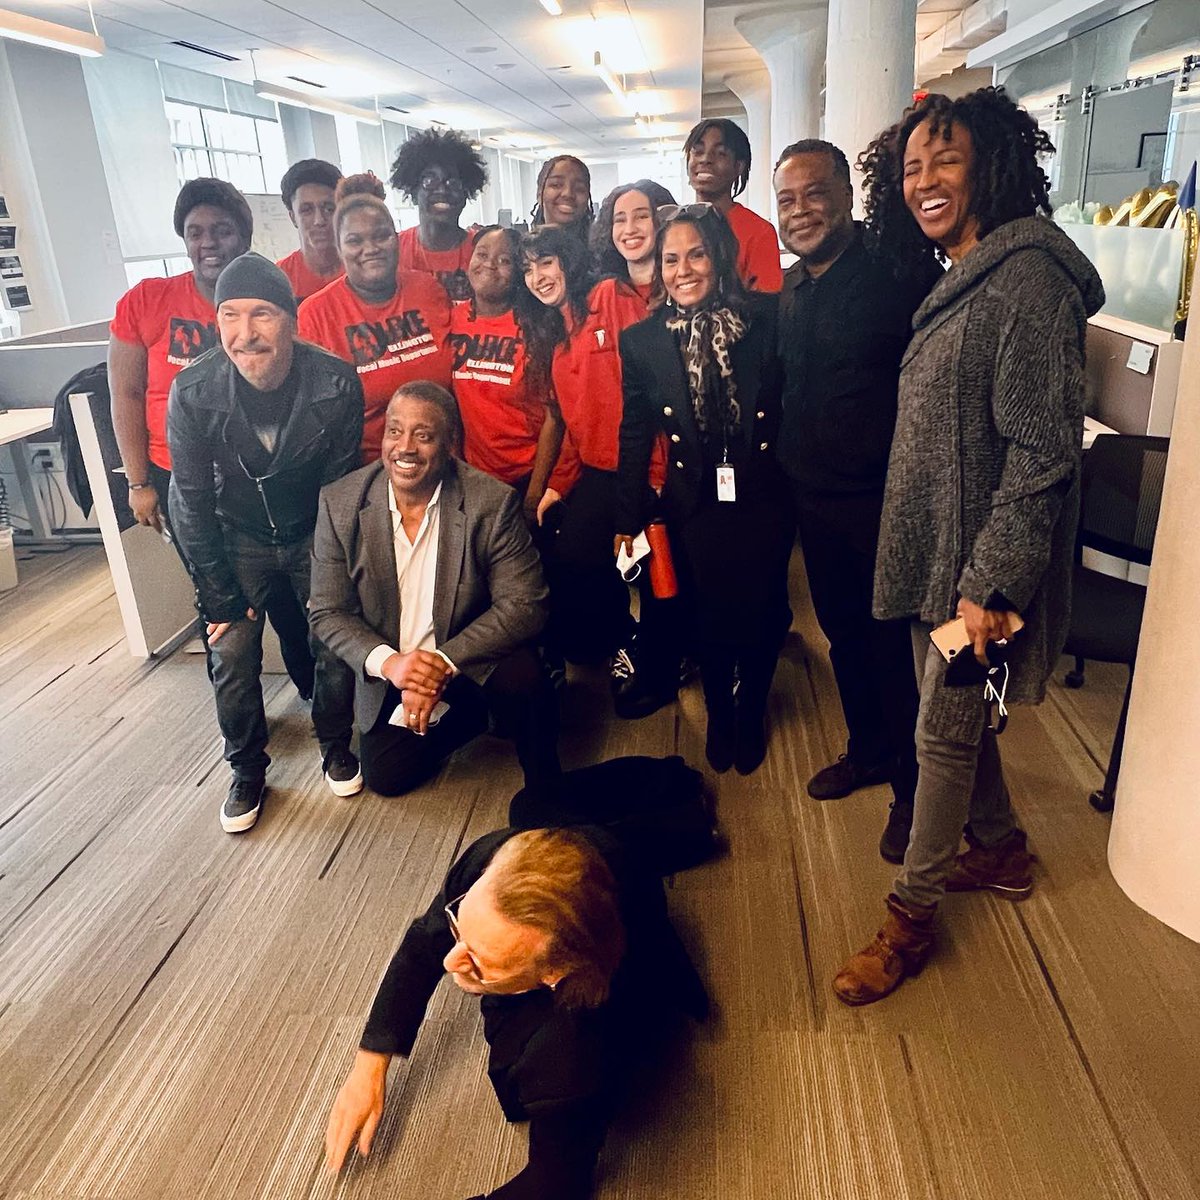 #Ellingtonarts students are always learning the rules of the industry inside & outside the classroom. On Monday, our Vocal Music Concert Choir visited NPR to sing alongside Bono, the lead singer of @U2 for @NPR's Tiny Desk Series! Stay tuned for the Tiny Desk video coming soon!